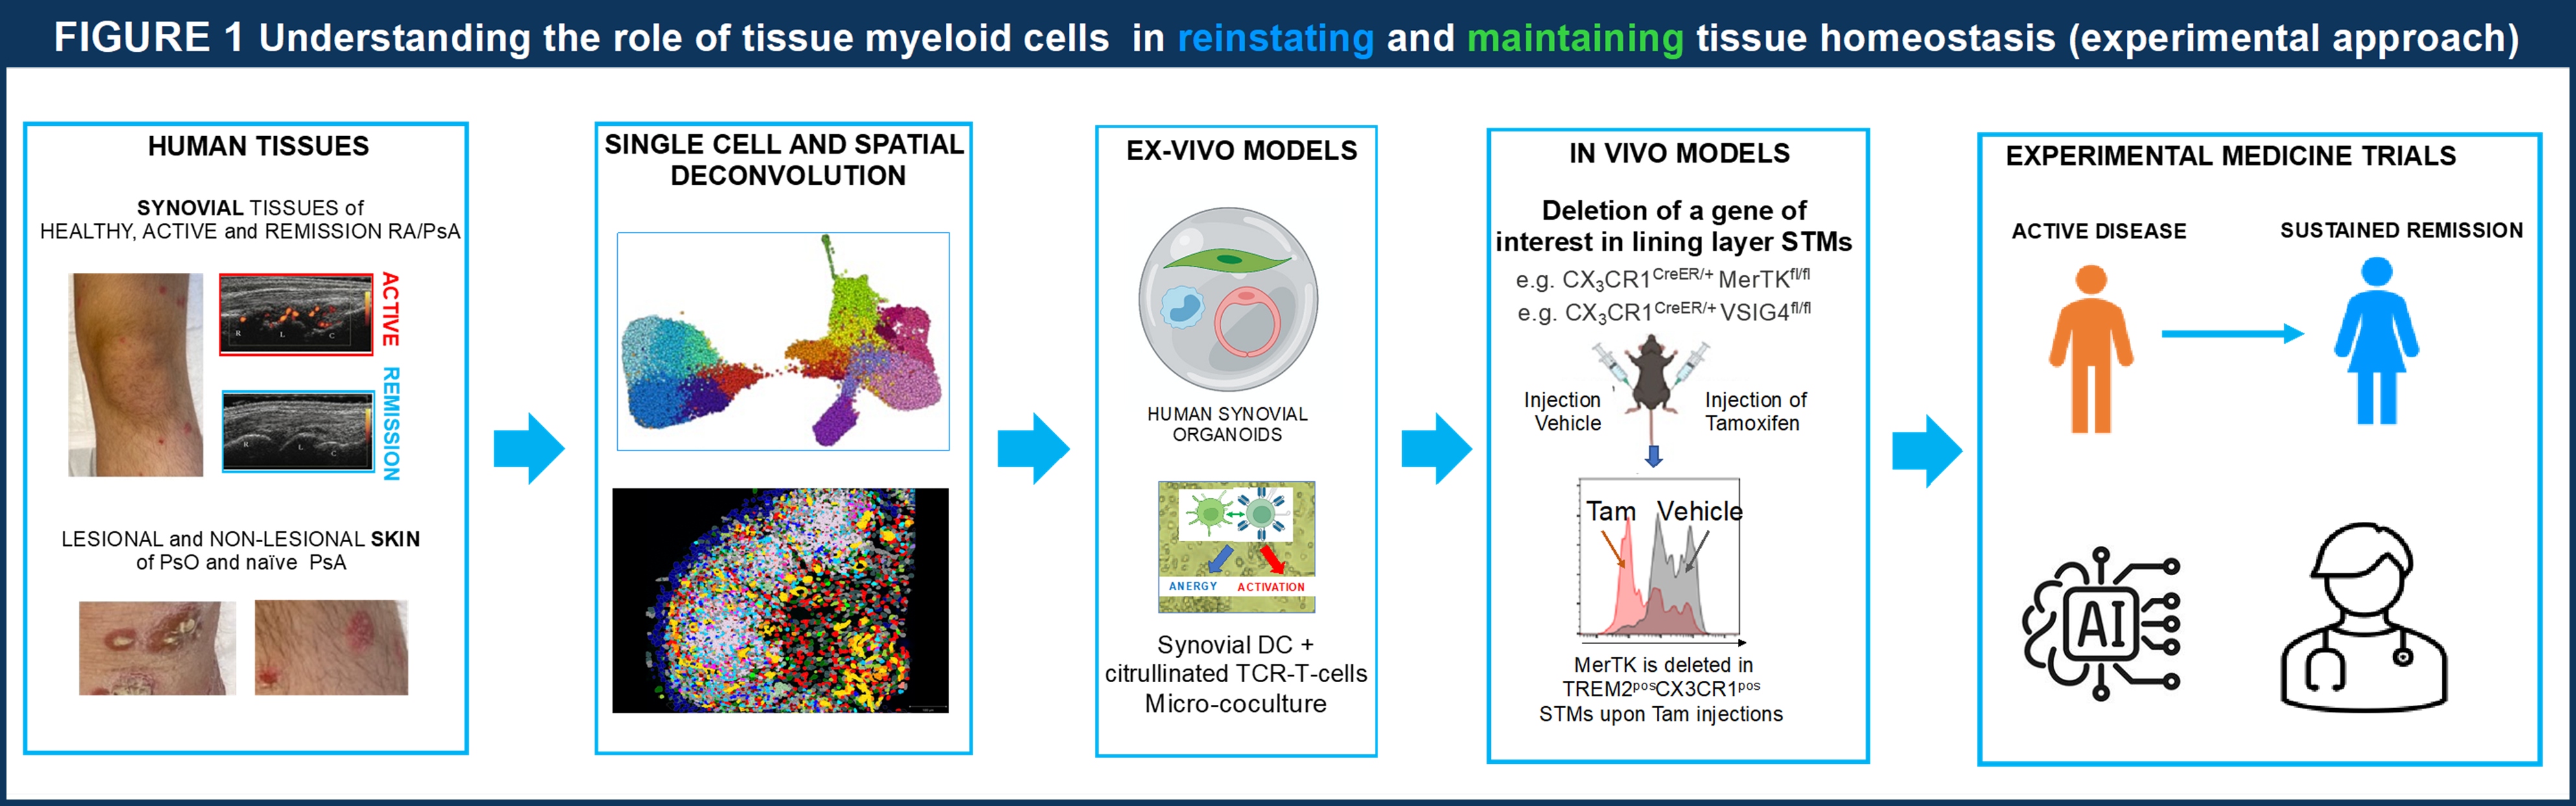 A graphic showing the understanding the role of tissue myeloid cells in reinstating and maintaining tissue homeostasis 